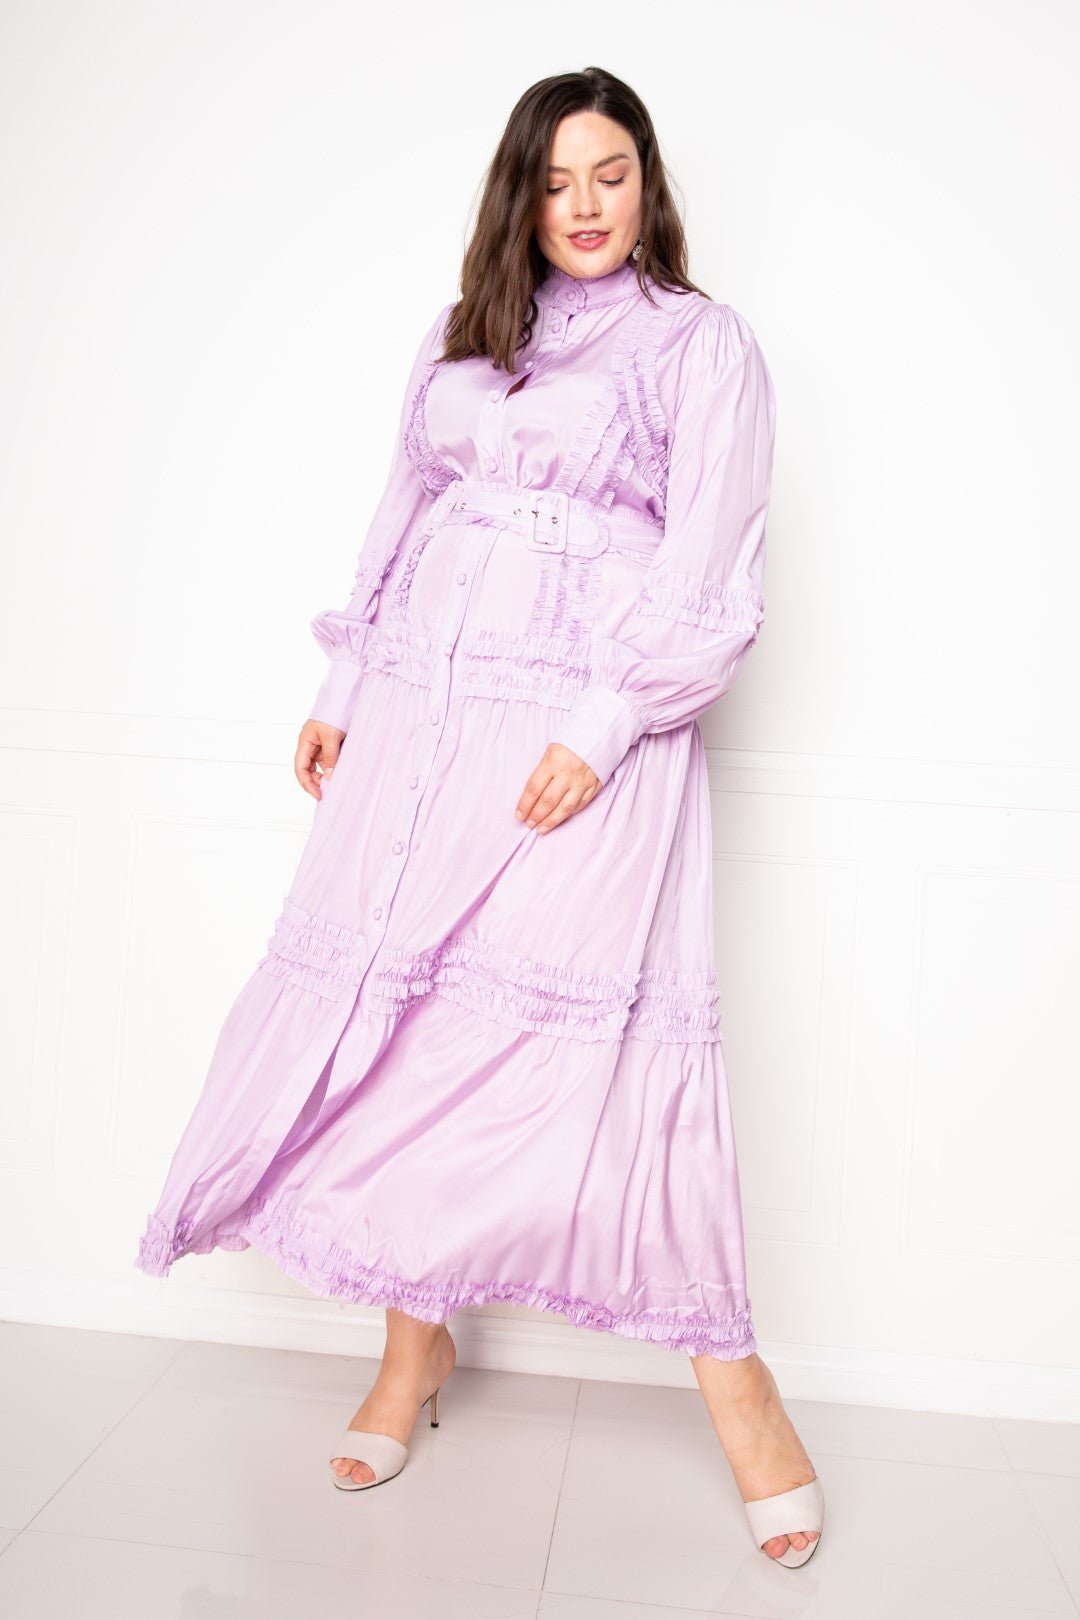 Belted Full Size Dress With Ruffle Detail - Violet